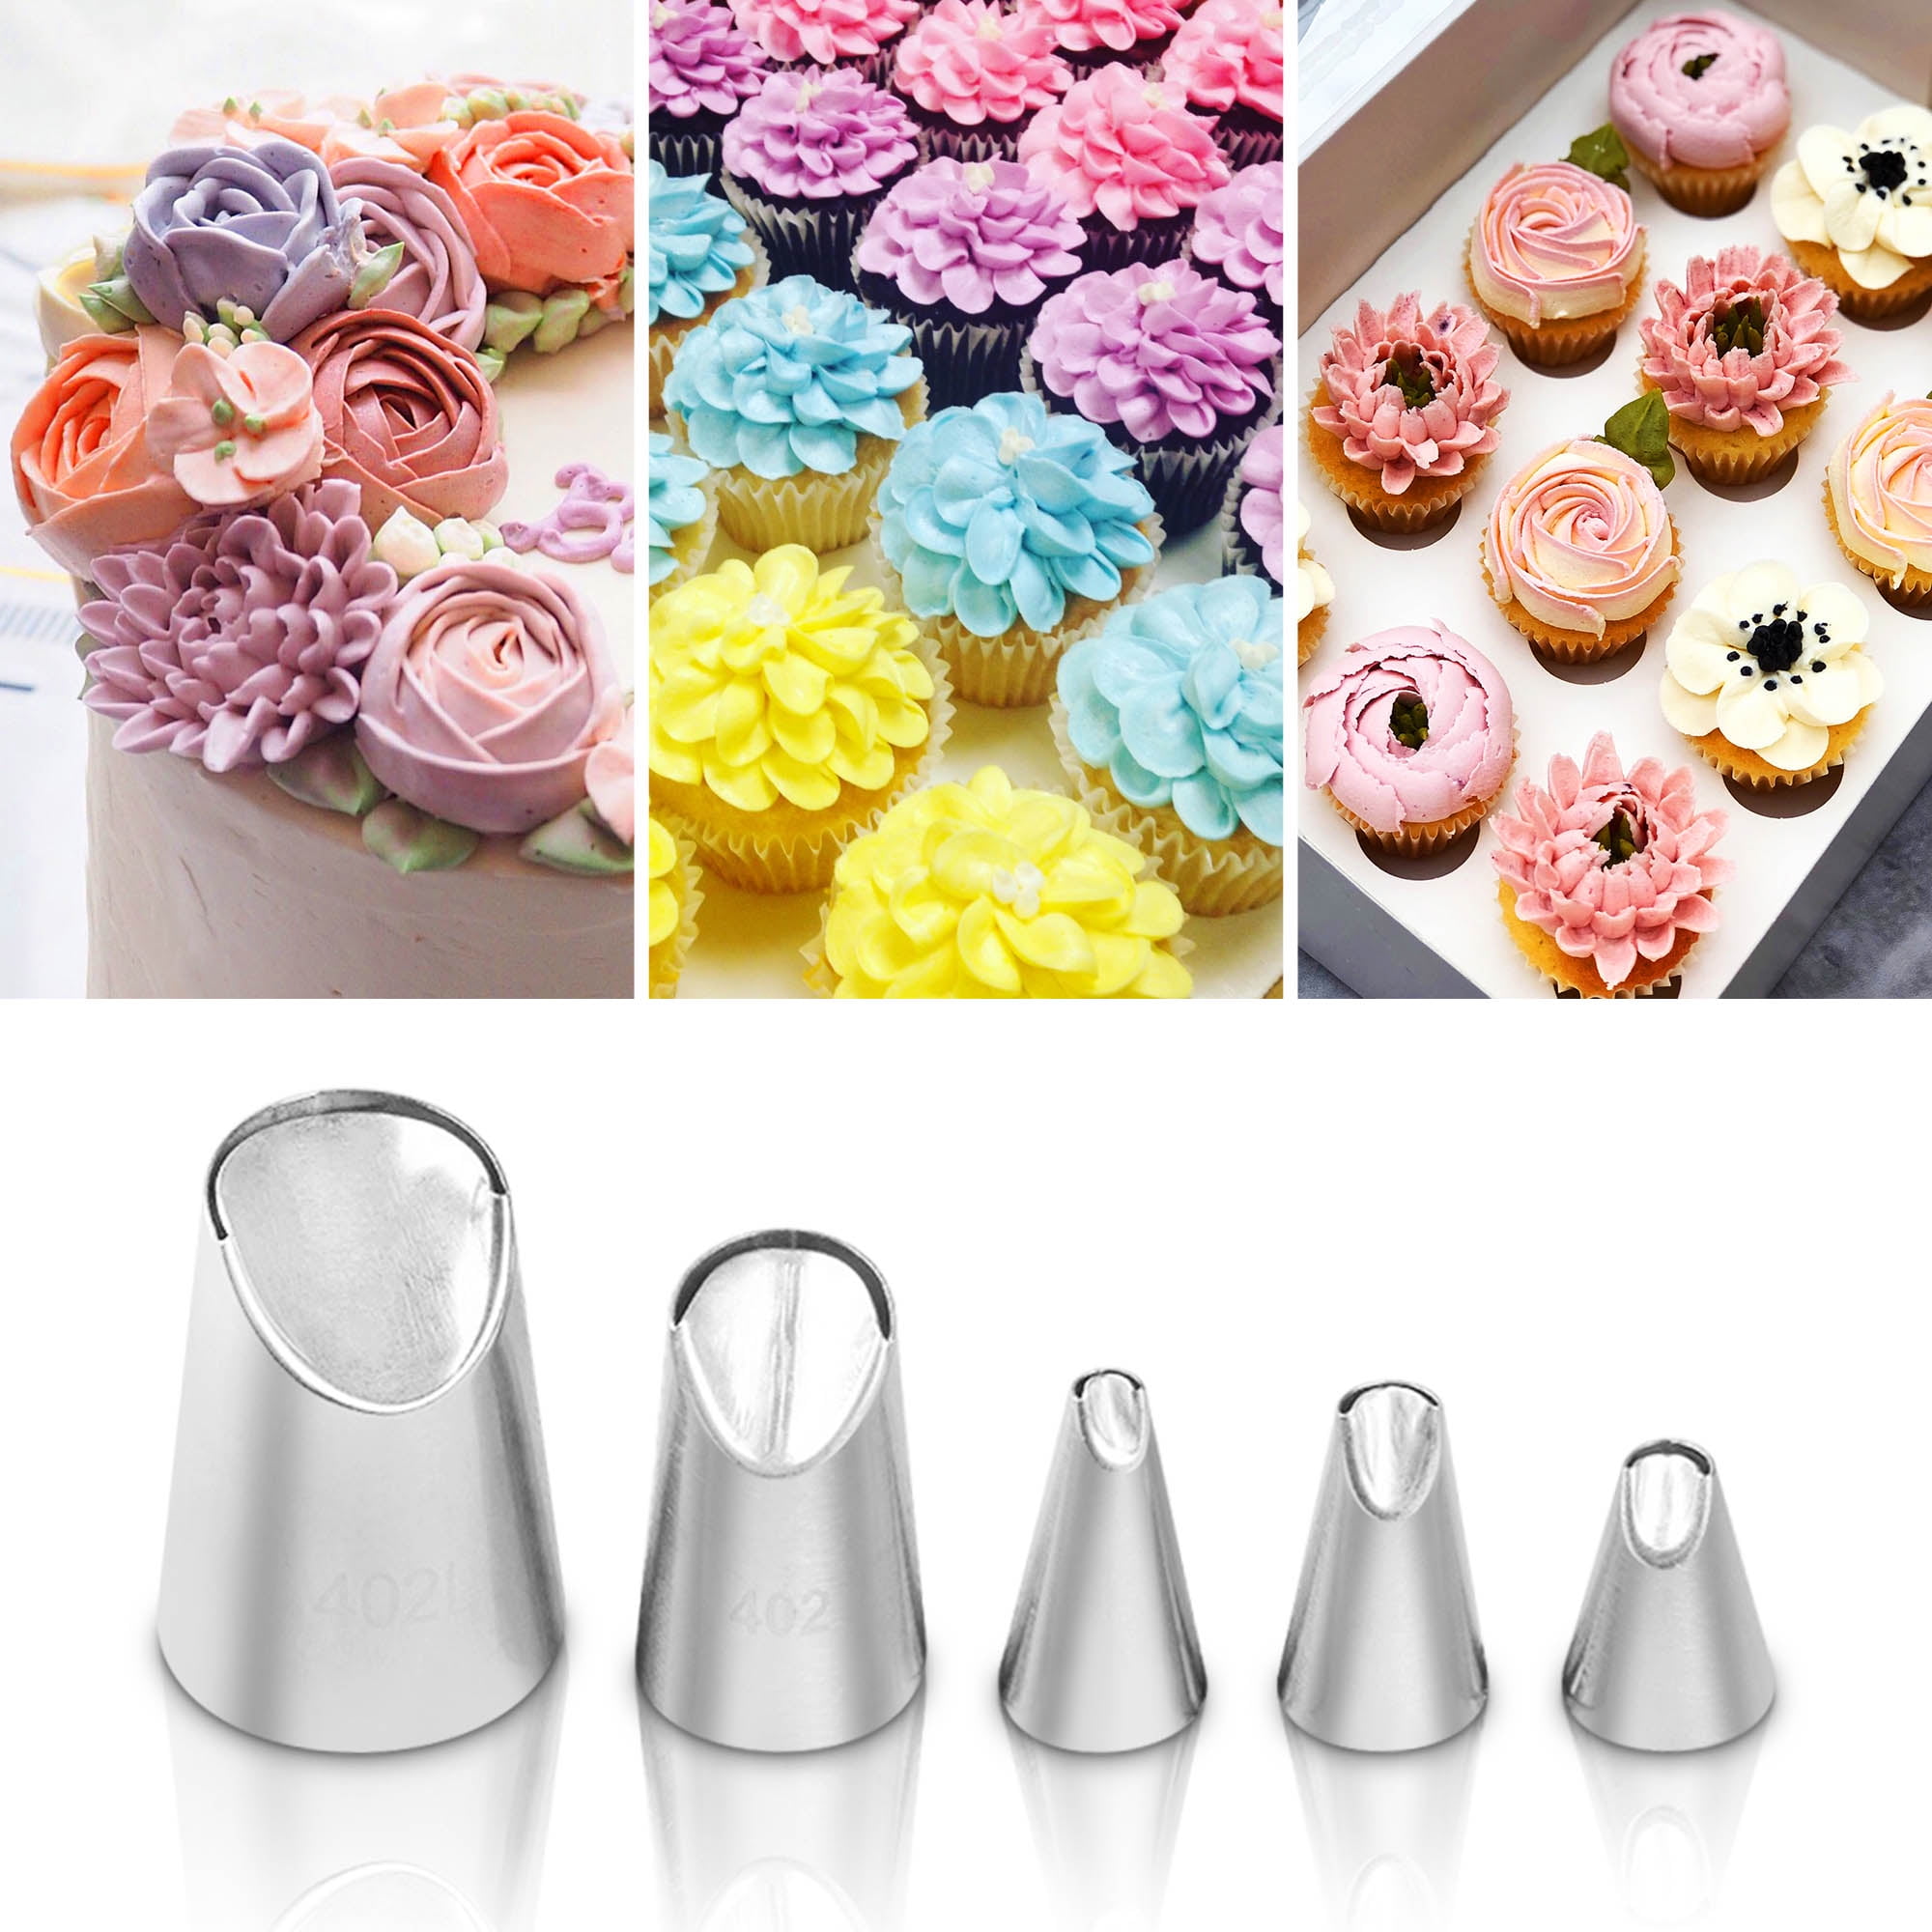 Flower Icing Piping Nozzles Pastry Tips Cake Sugarcraft Decorating Baking Tools 